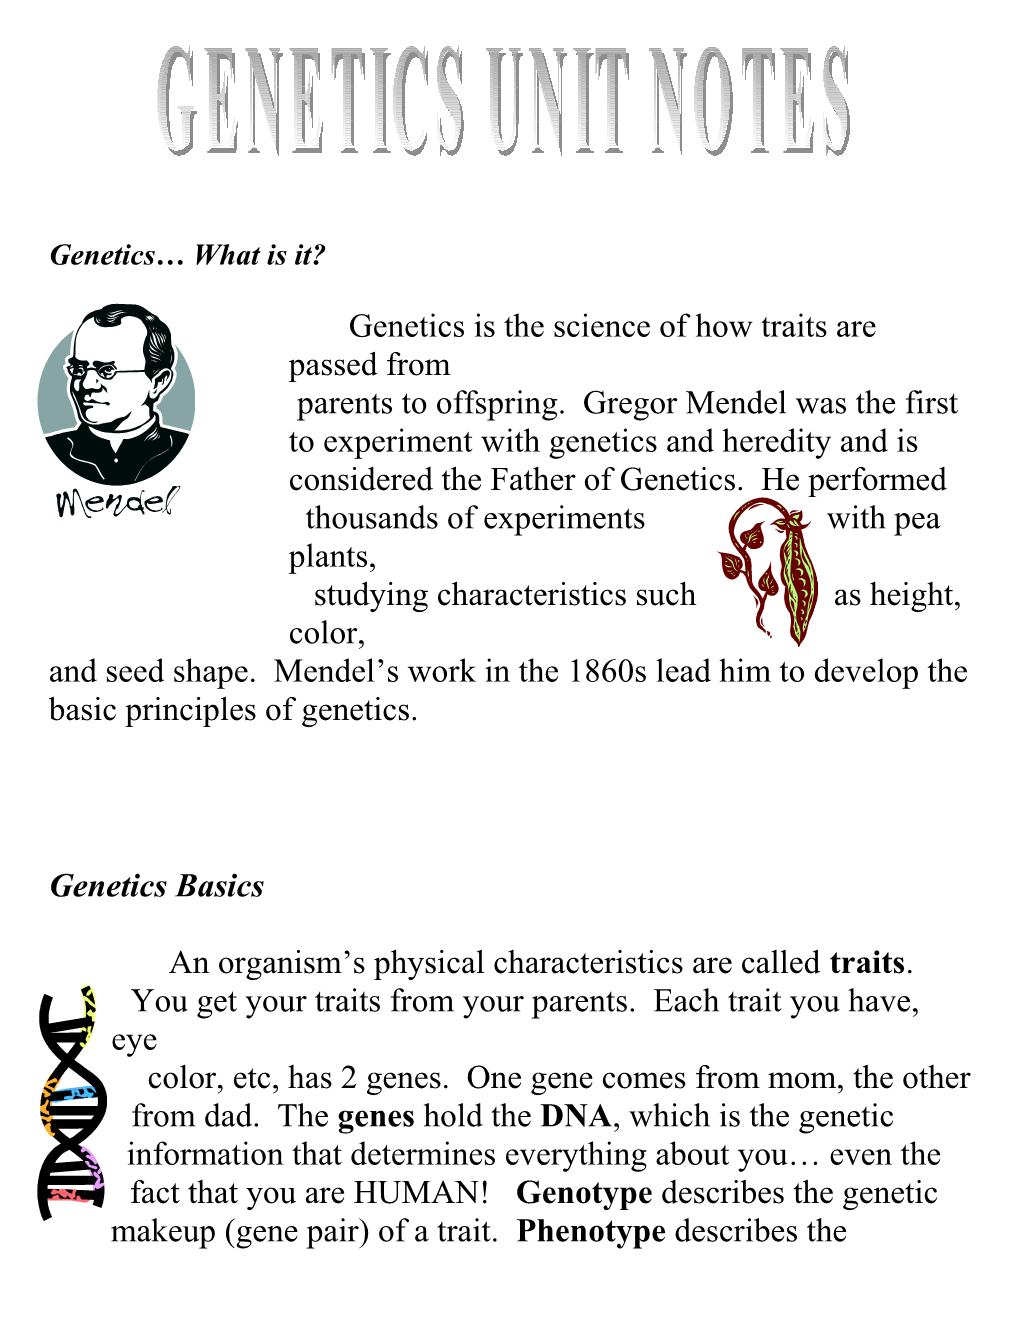 Genetics Is the Science of How Traits Are Passed From